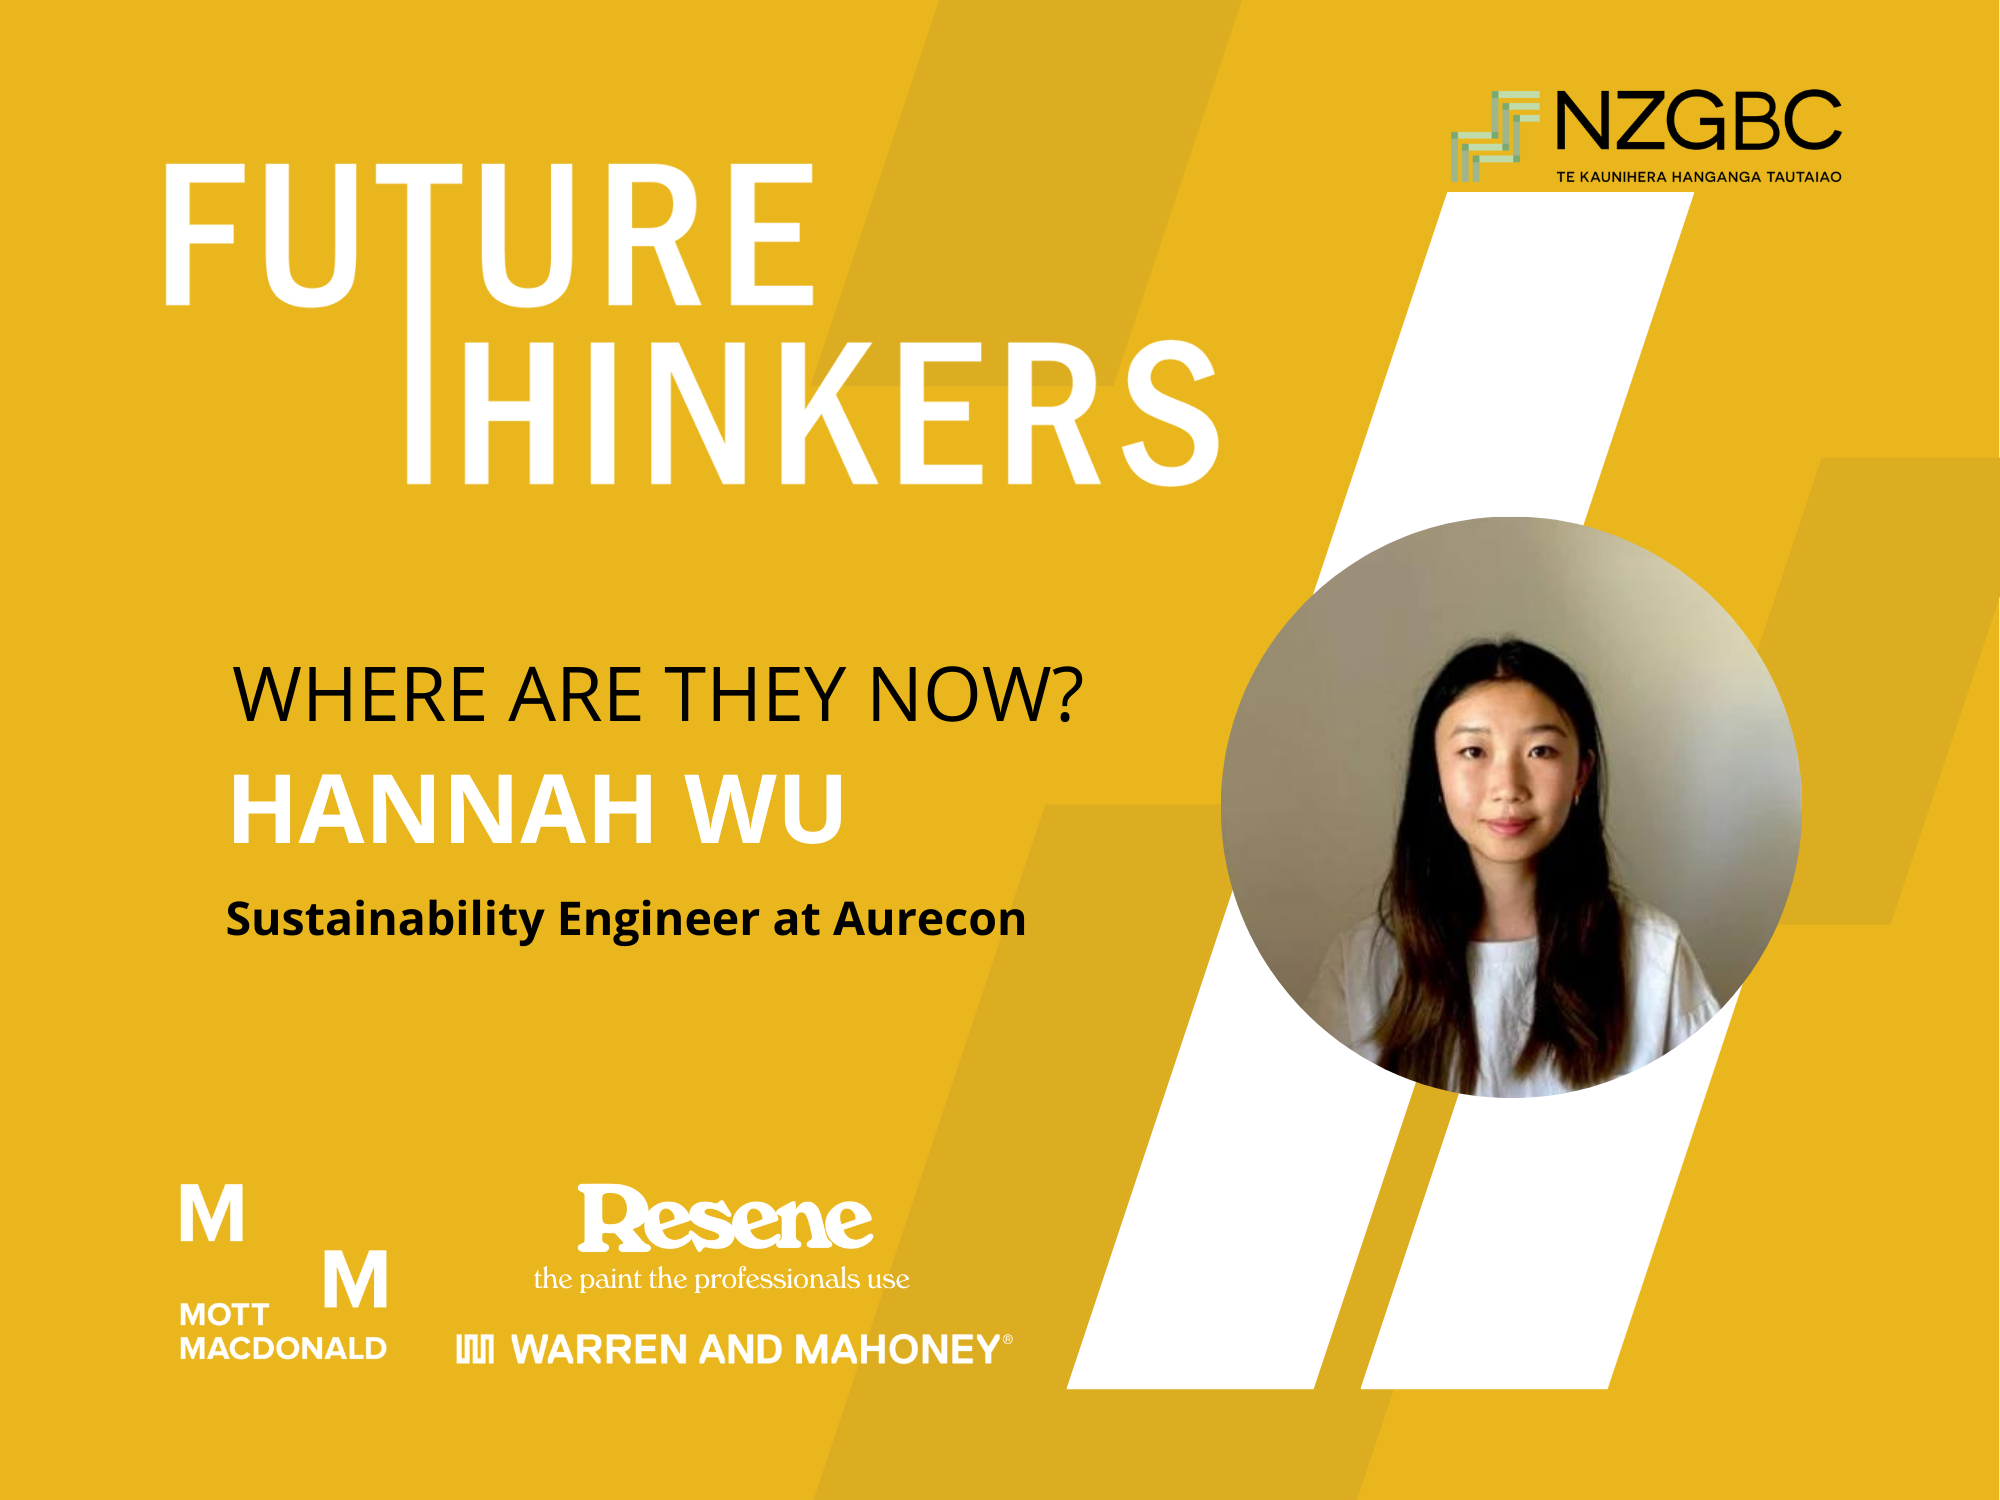 NZGBC Future Thinkers - Where Are They Now? - Hannah Wu